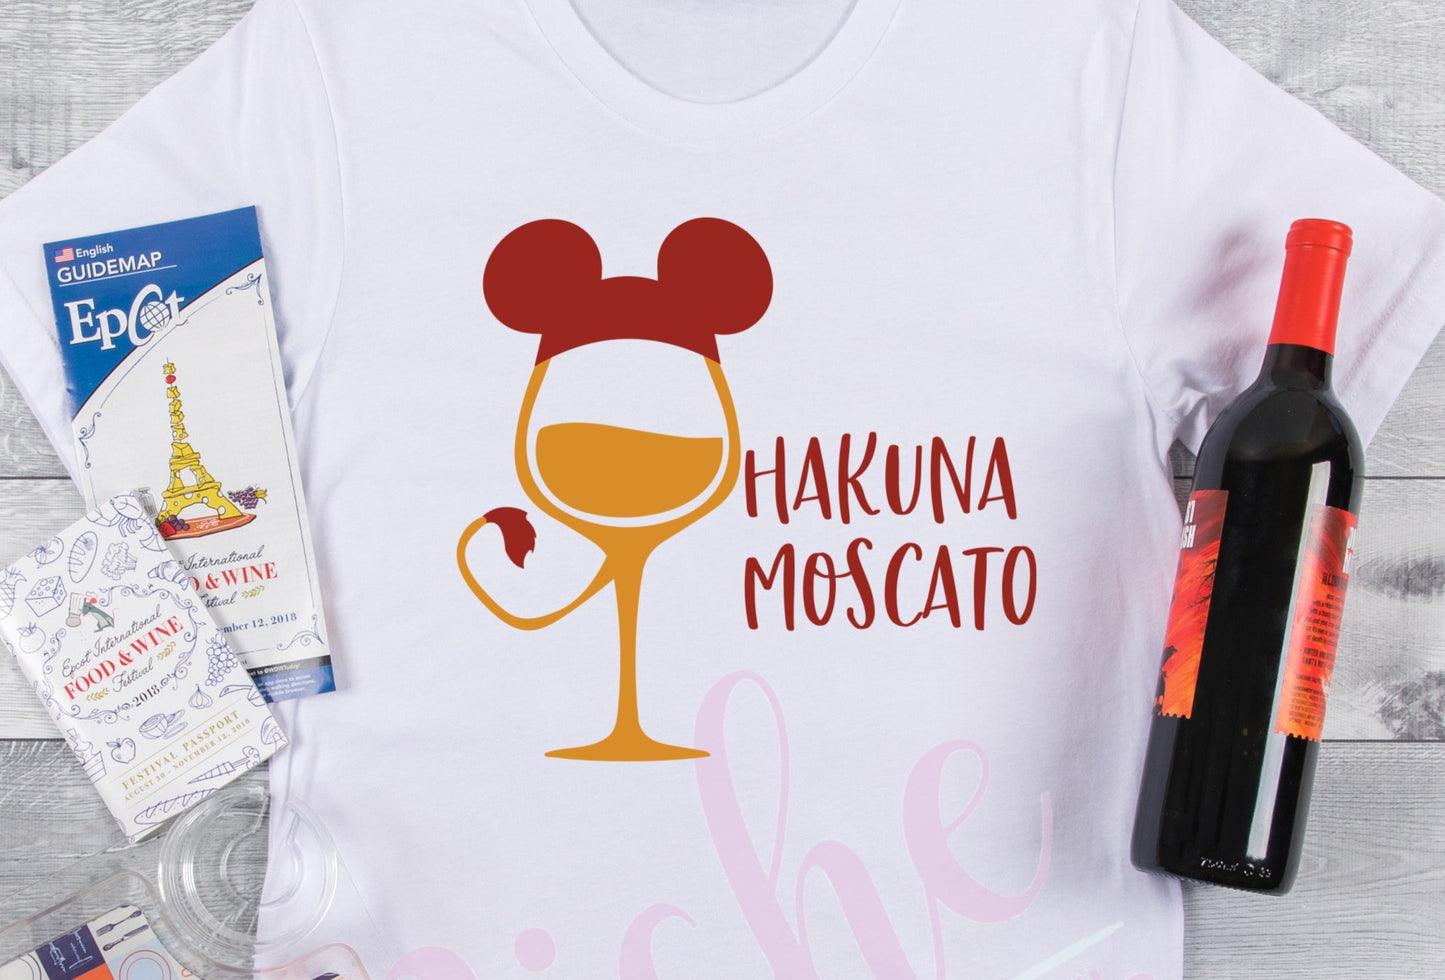 * Lion King Drinking Wine Decal